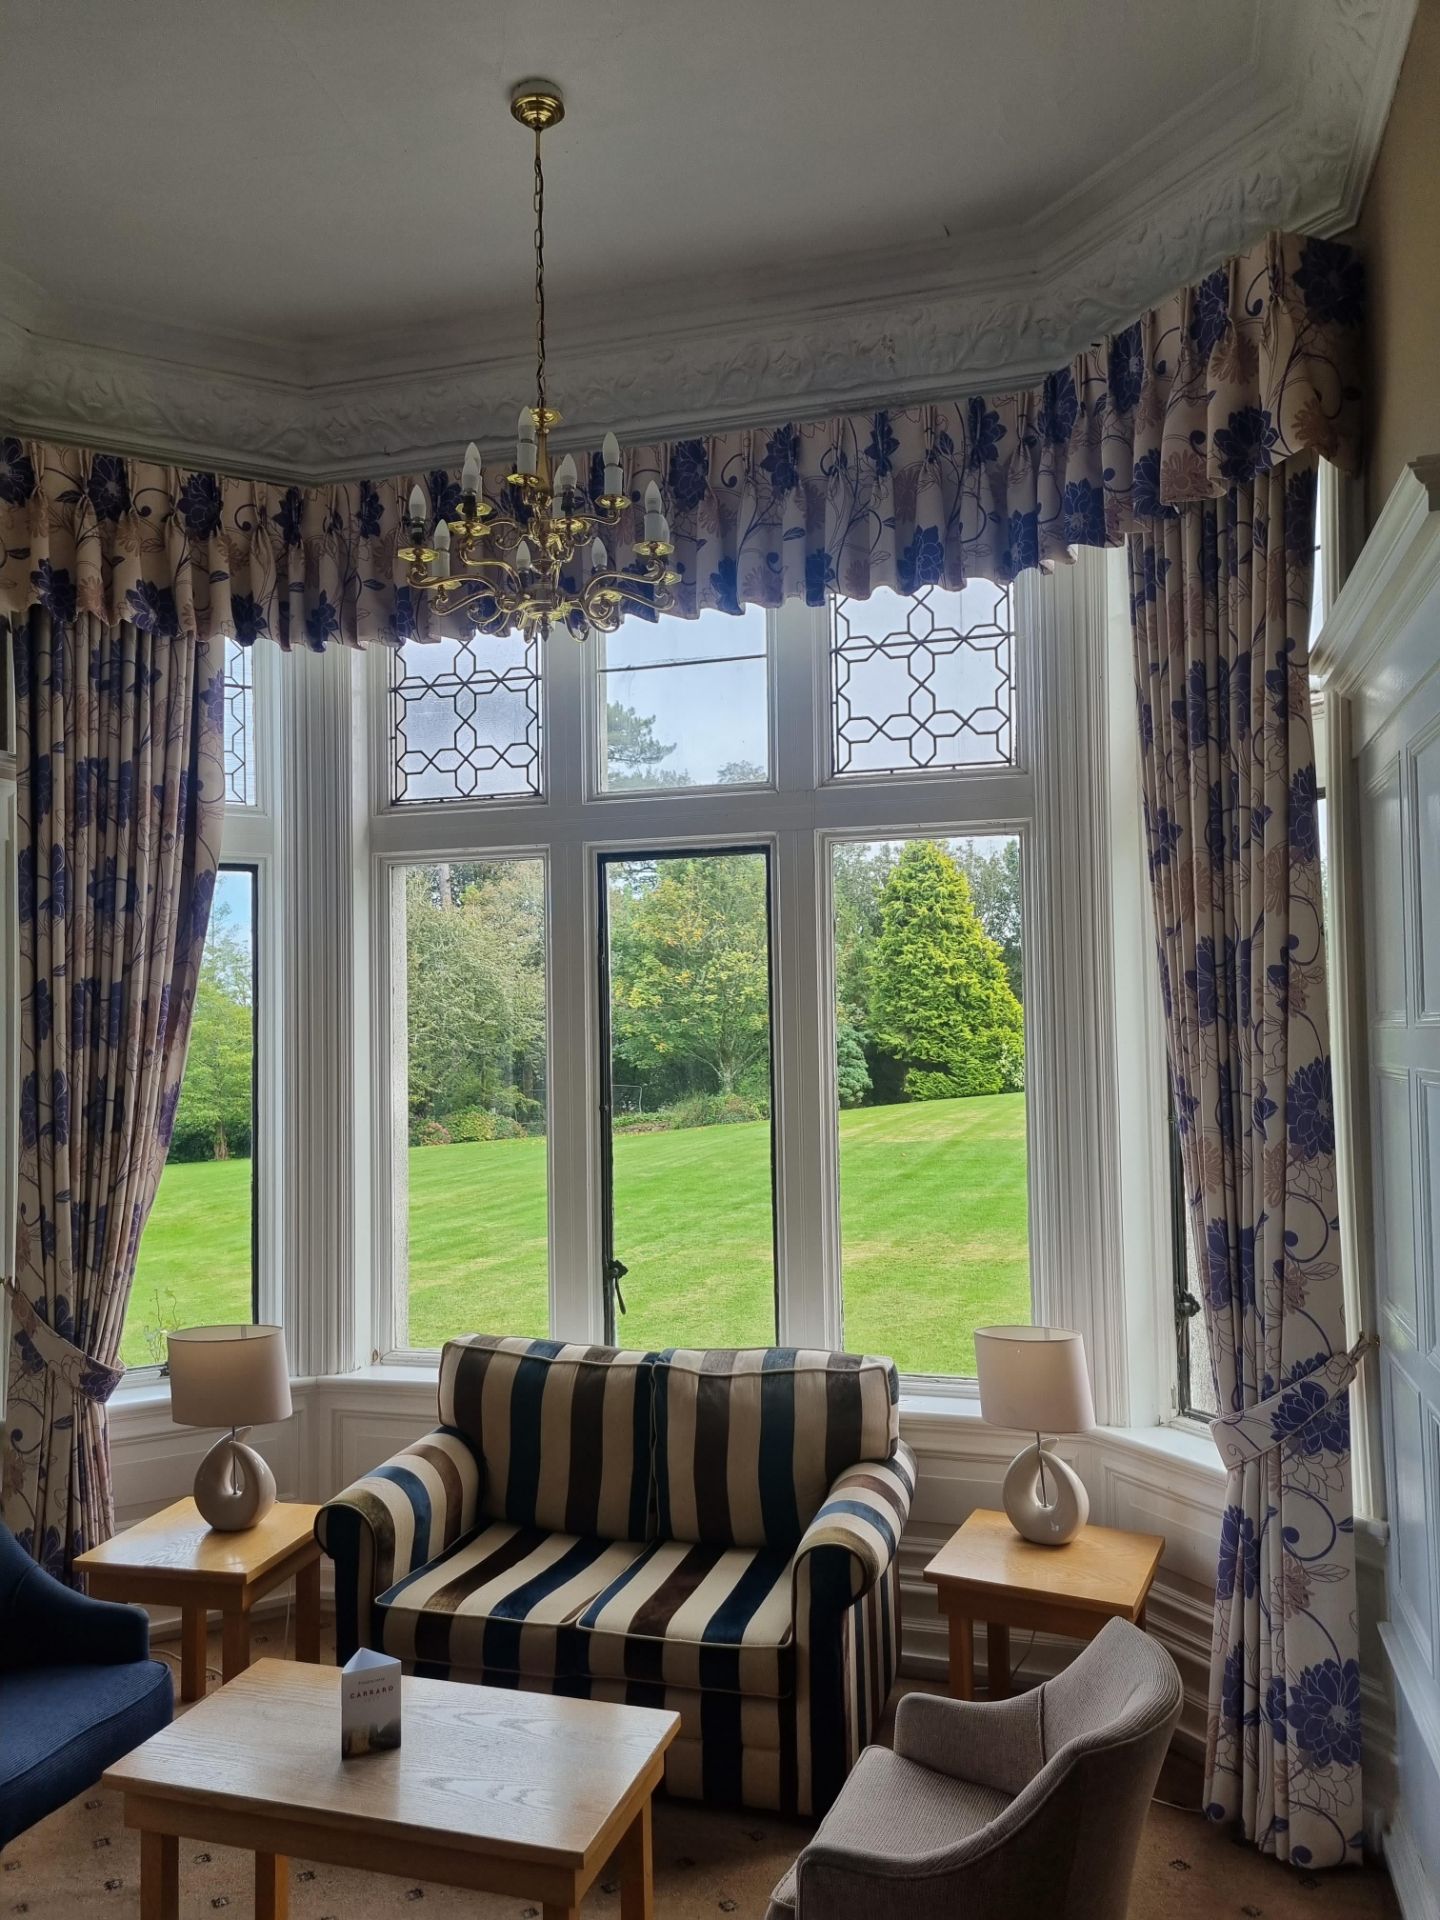 4 Sets Of Cream And Blue Fully Lined Curtains With Matching Pelmet And Tie Backs D3300mm W 1500mm, D - Image 3 of 5